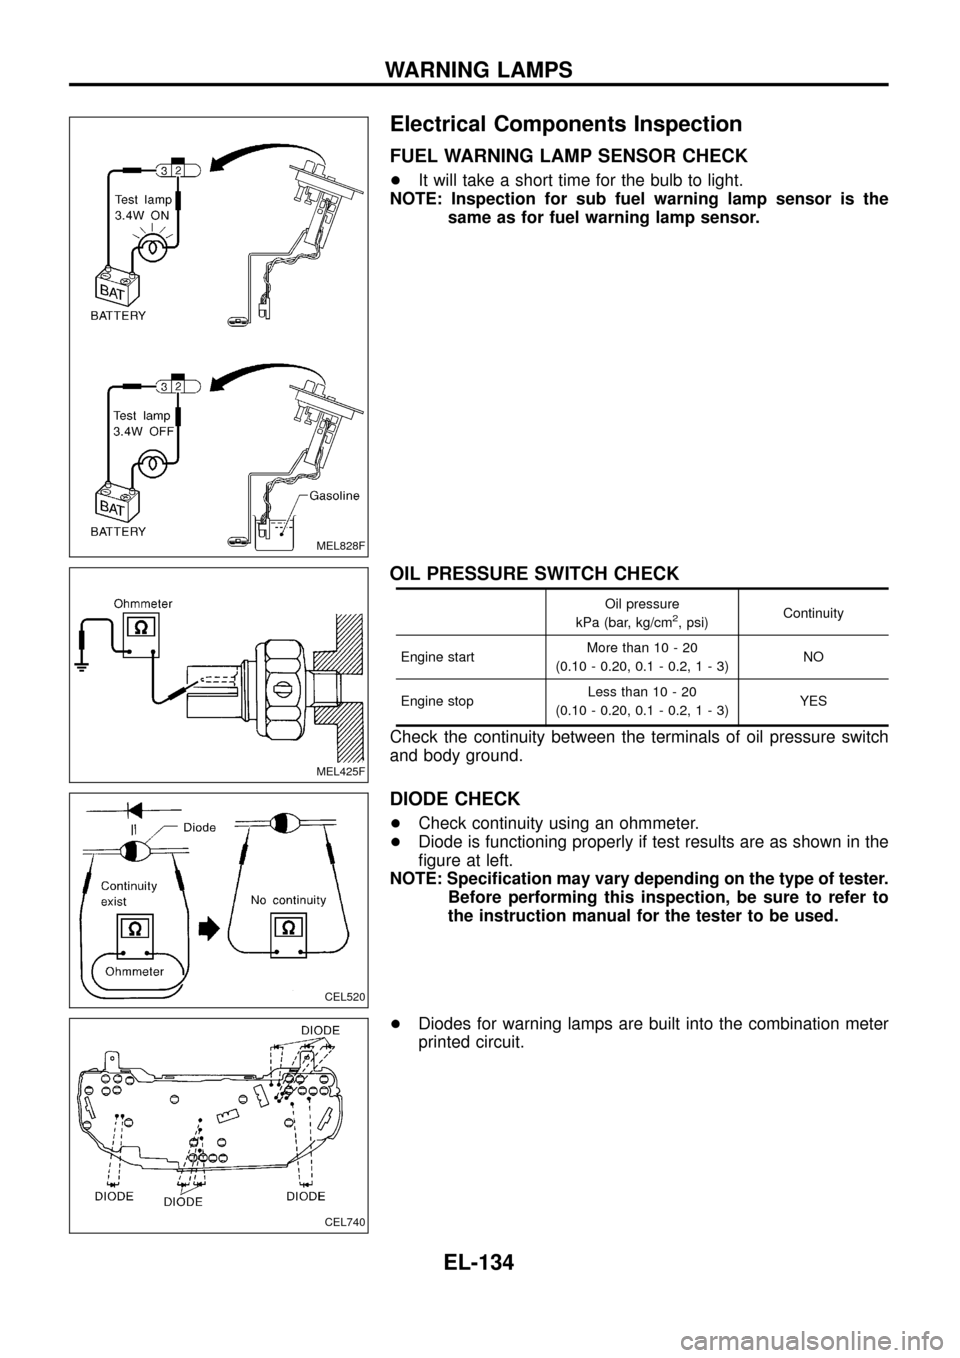 NISSAN PATROL 1998 Y61 / 5.G Electrical System Owners Manual Electrical Components Inspection
FUEL WARNING LAMP SENSOR CHECK
+It will take a short time for the bulb to light.
NOTE: Inspection for sub fuel warning lamp sensor is the
same as for fuel warning lamp